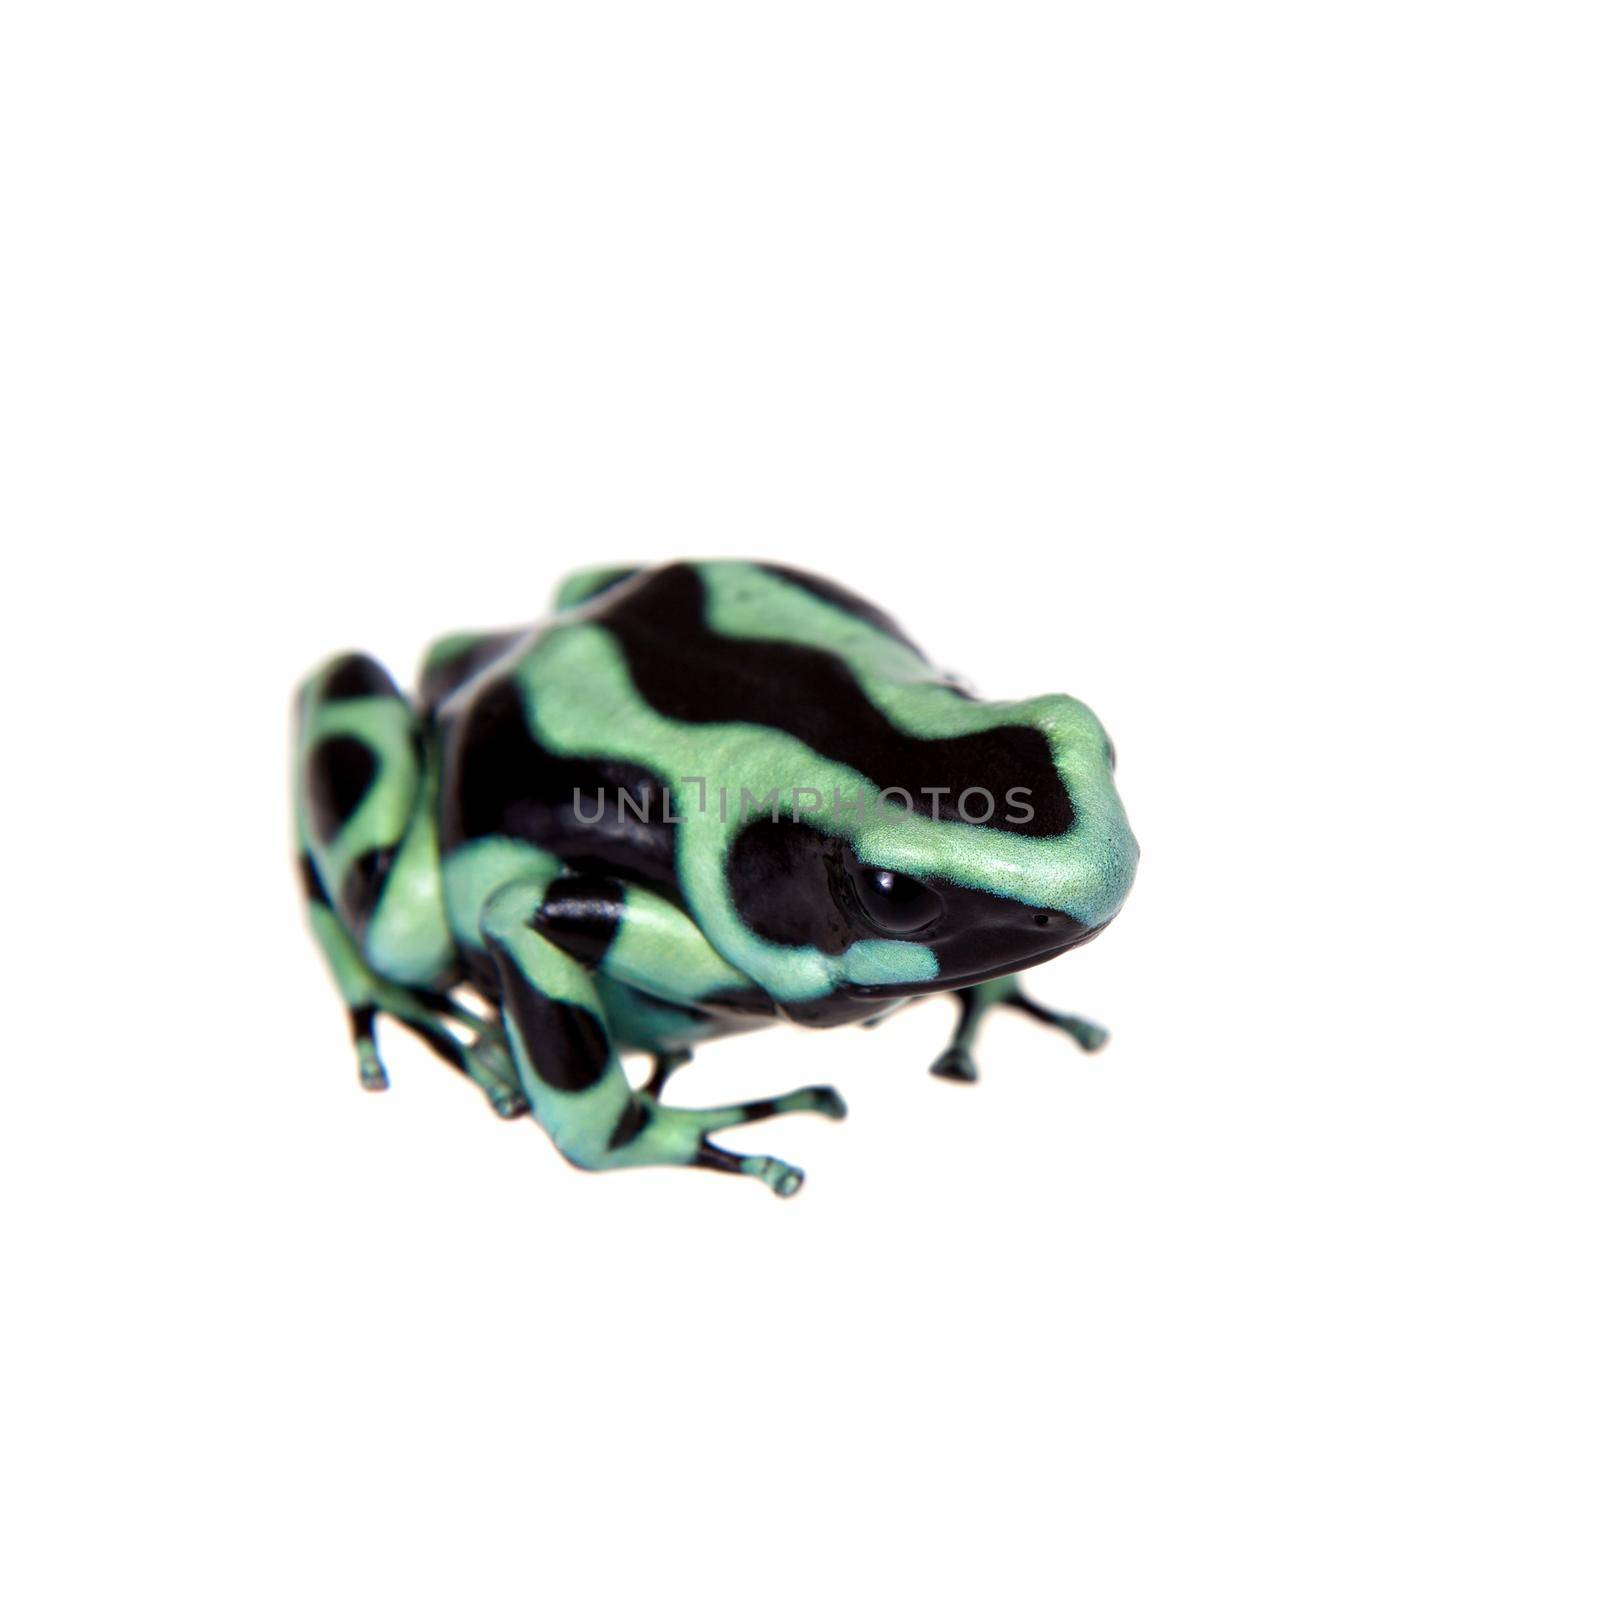 Green-and-Black Poison Dart Frog isolated on white by RosaJay